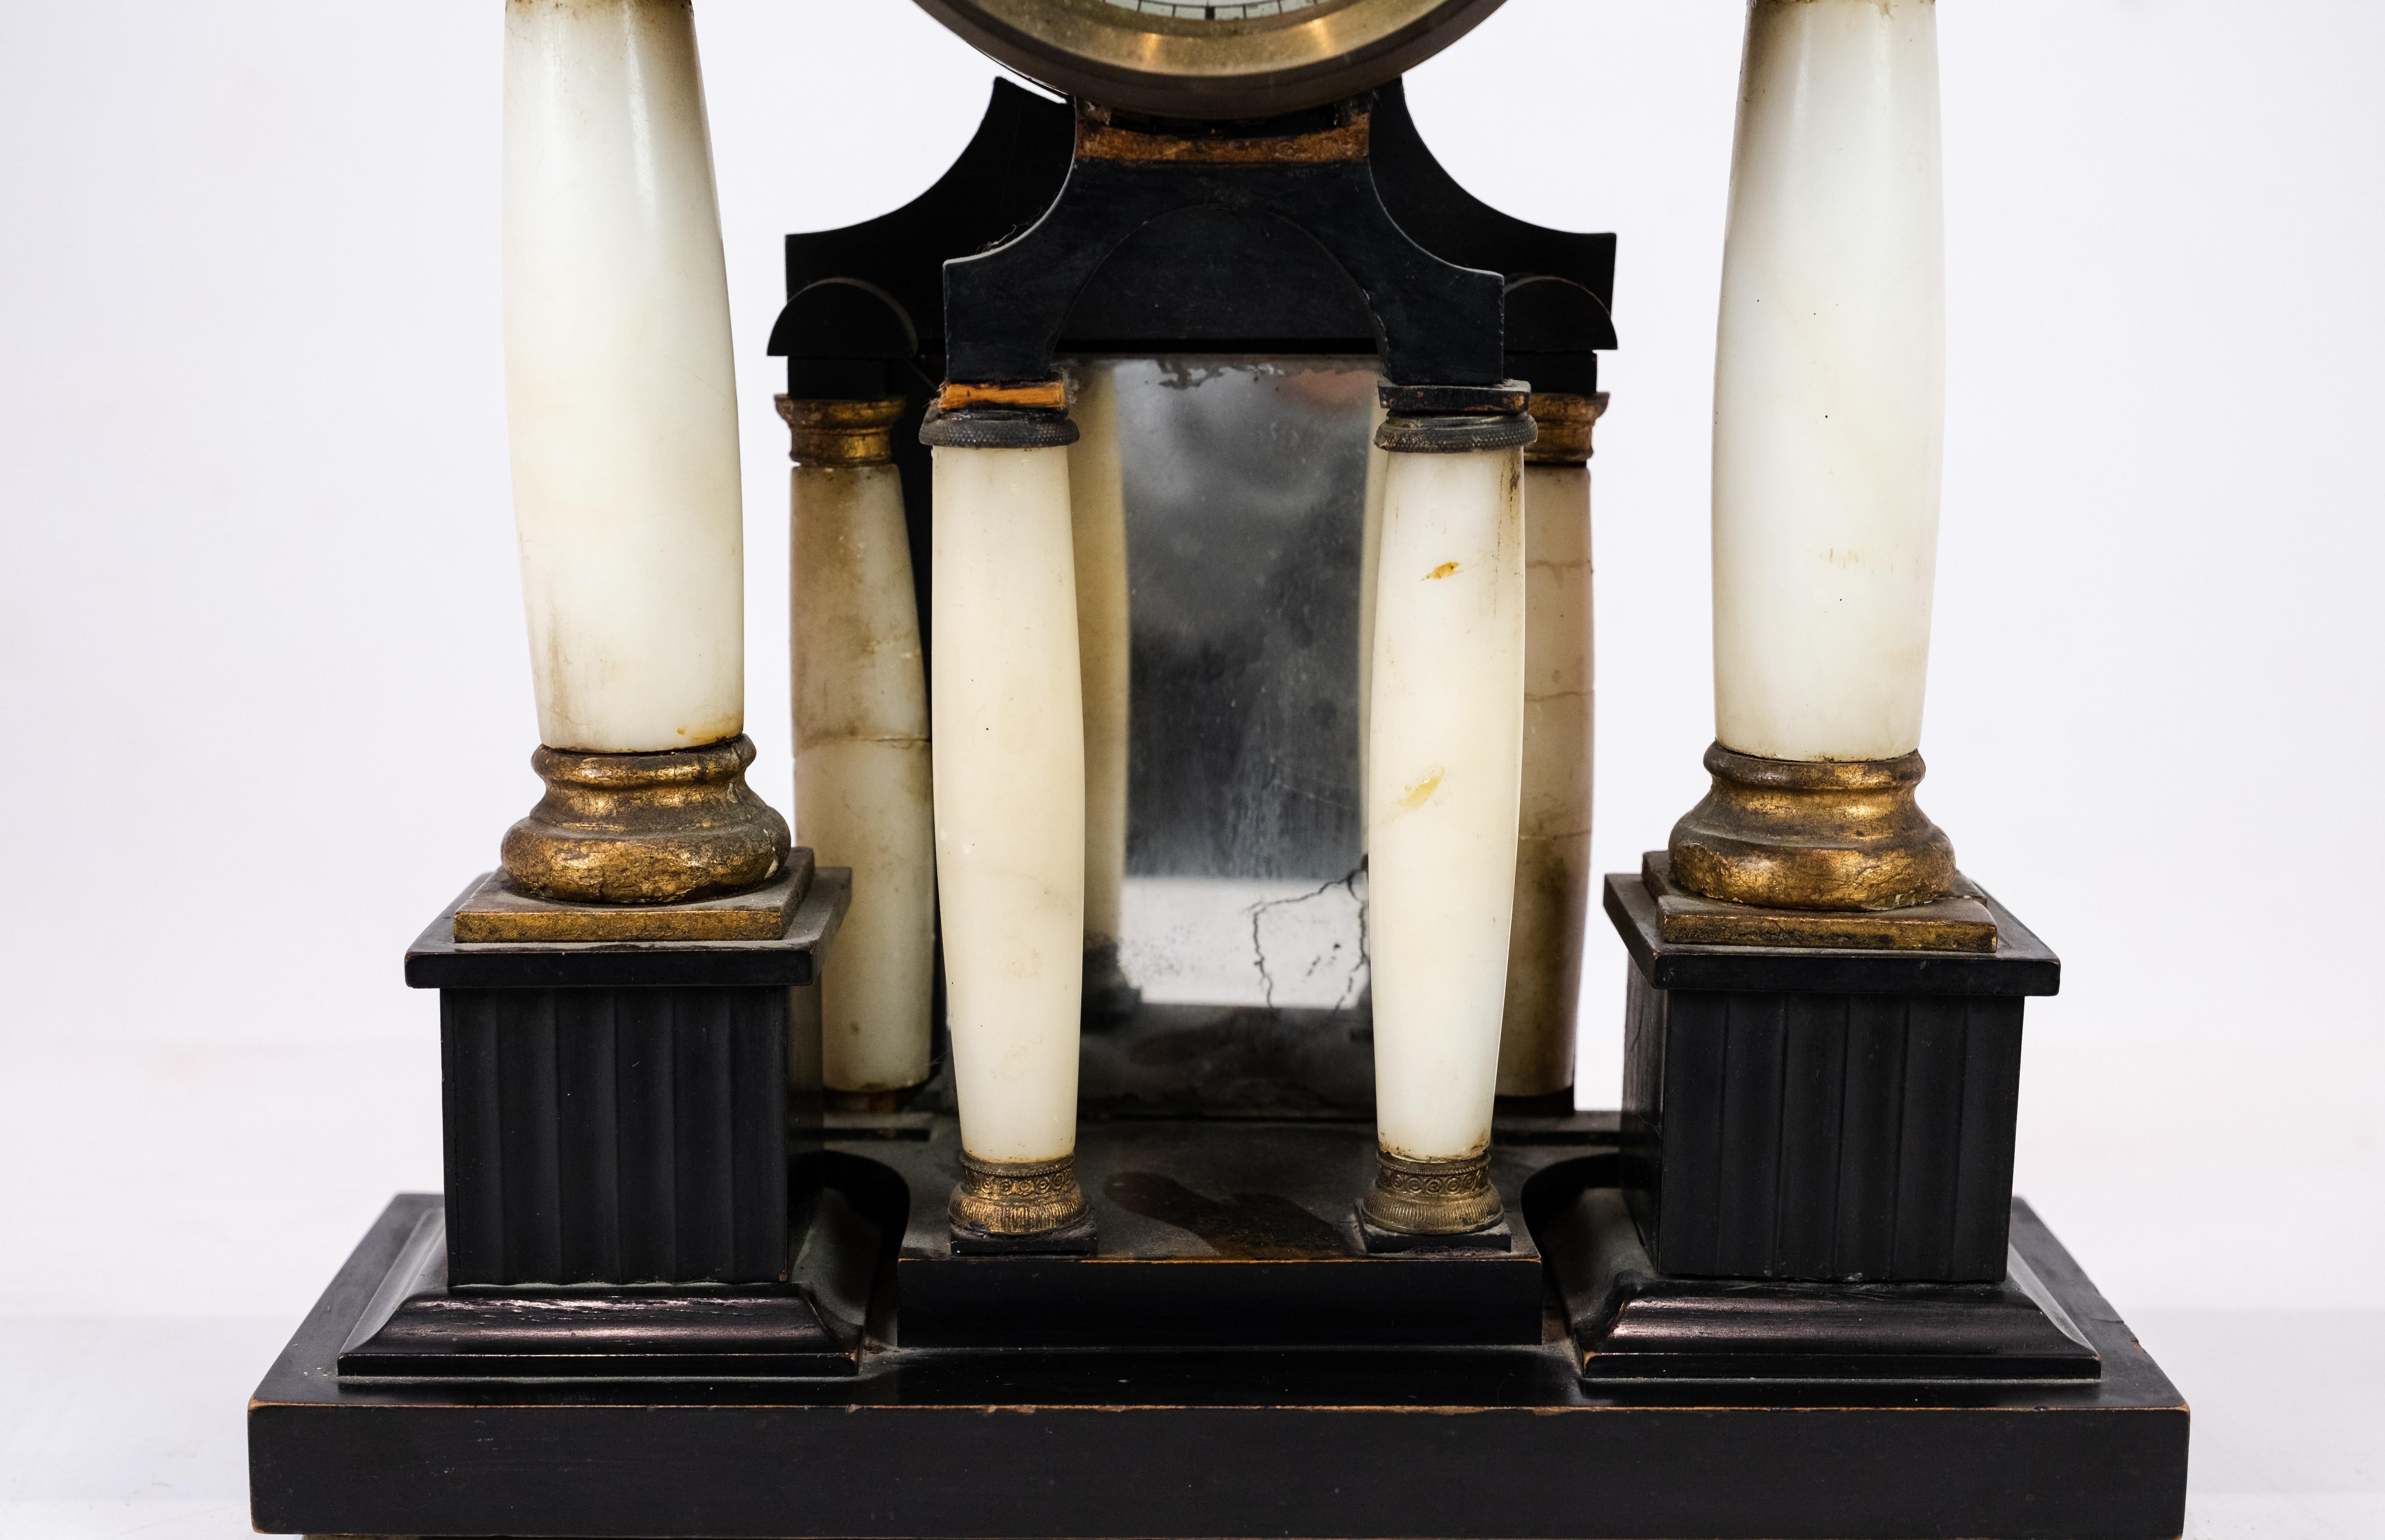 Mid-19th Century French Fireplace Clock of Marble, Bronze & Decorated With Ornaments From 1840s For Sale